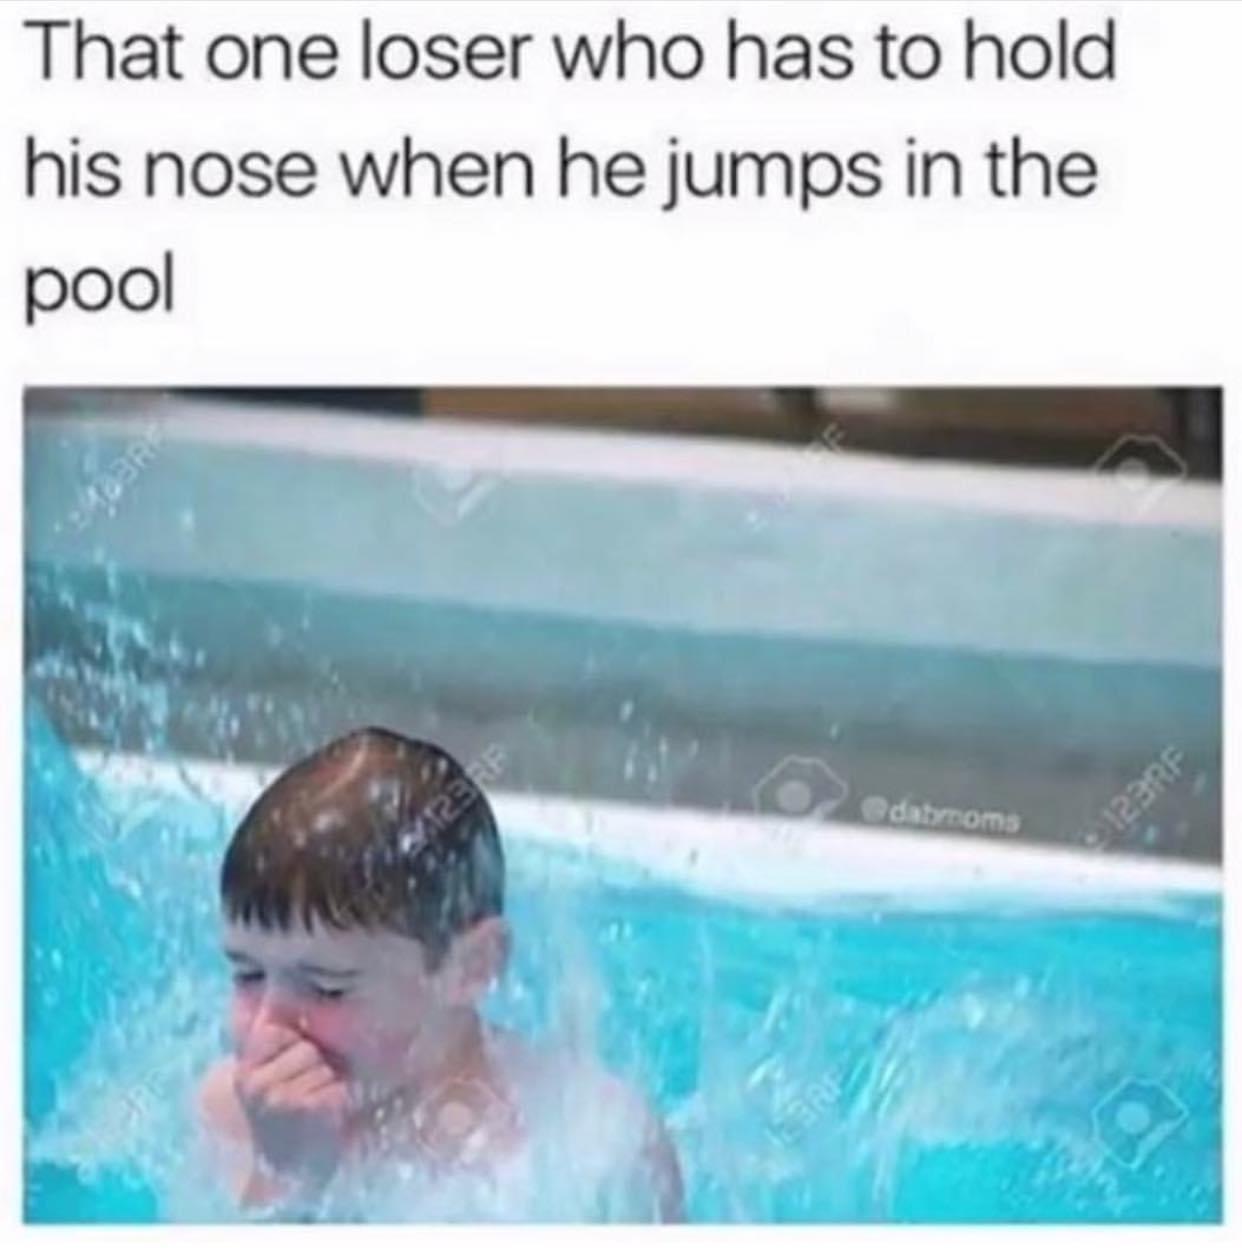 one loser who has to hold his nose - That one loser who has to hold his nose when he jumps in the pool 123RF